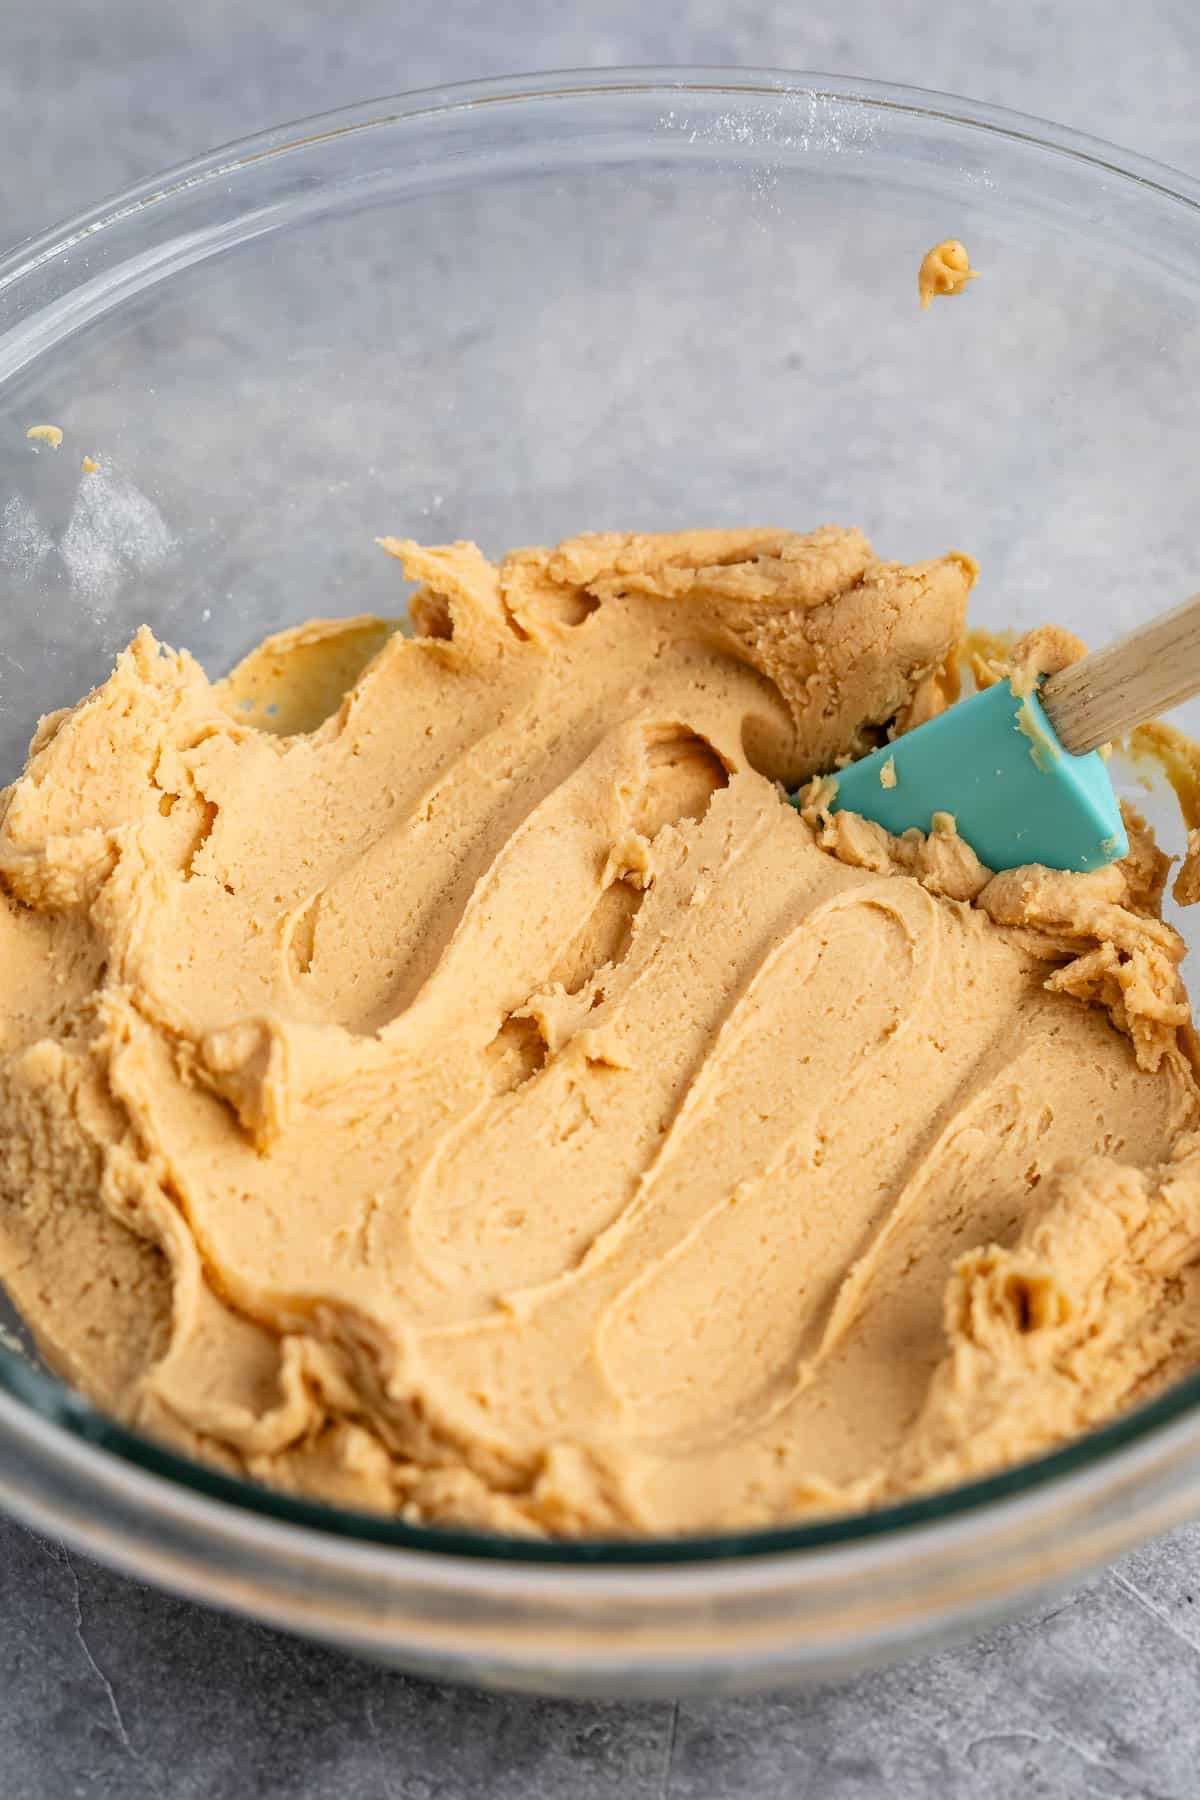 peanut butter frosting in a clear bowl with a teal spatula.